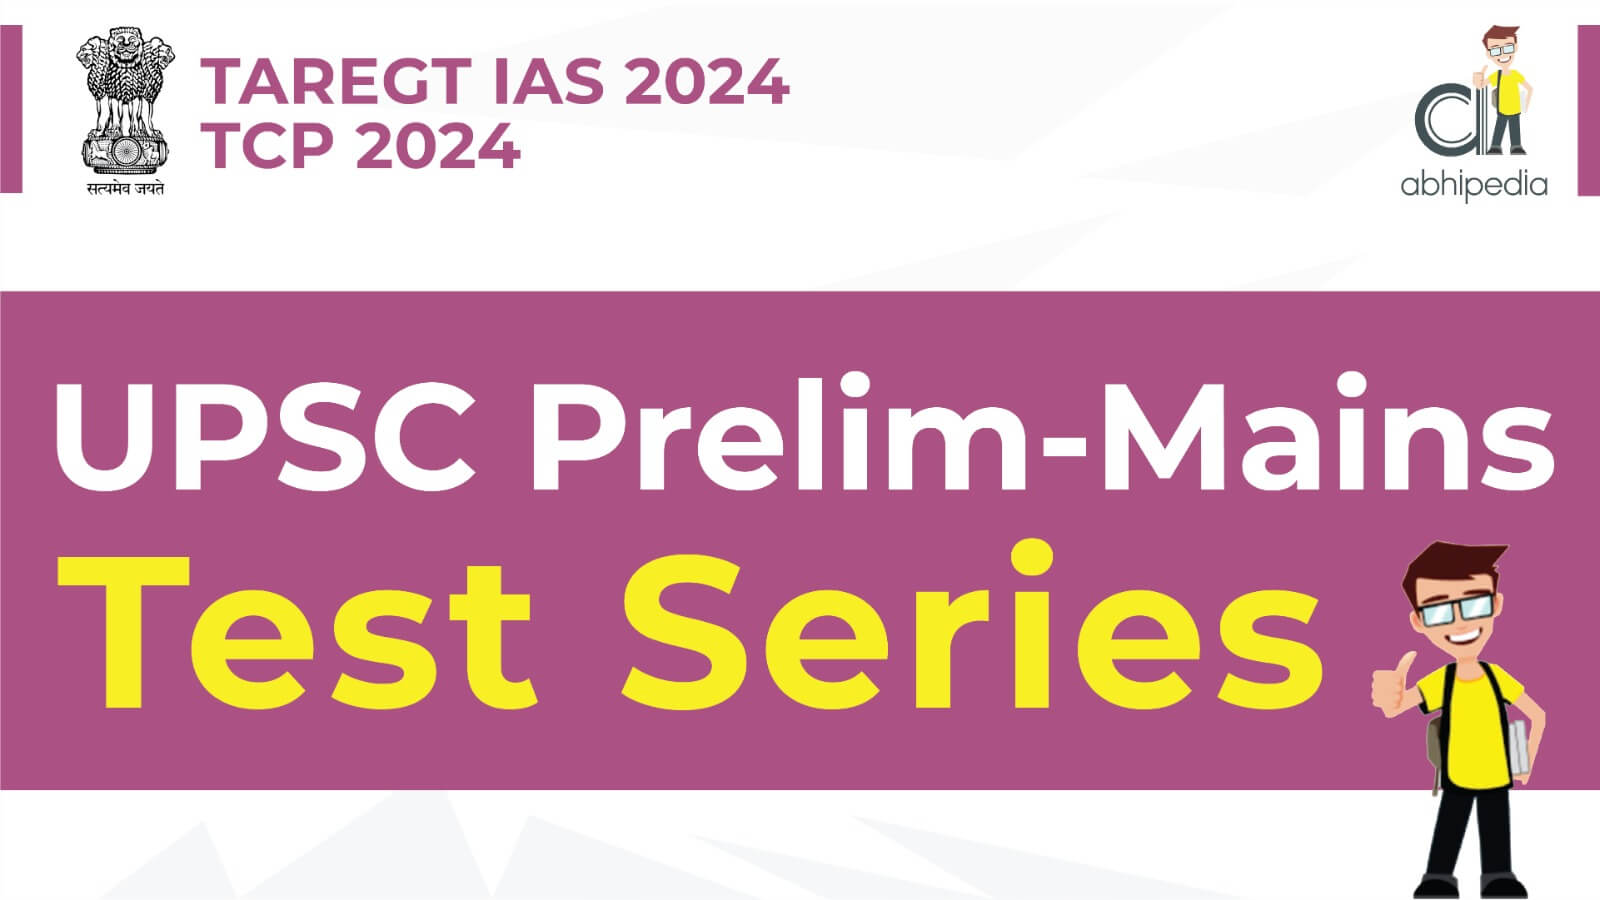 UPSC Prelims and Mains Test Series Ace the IAS Exam with the Best Test